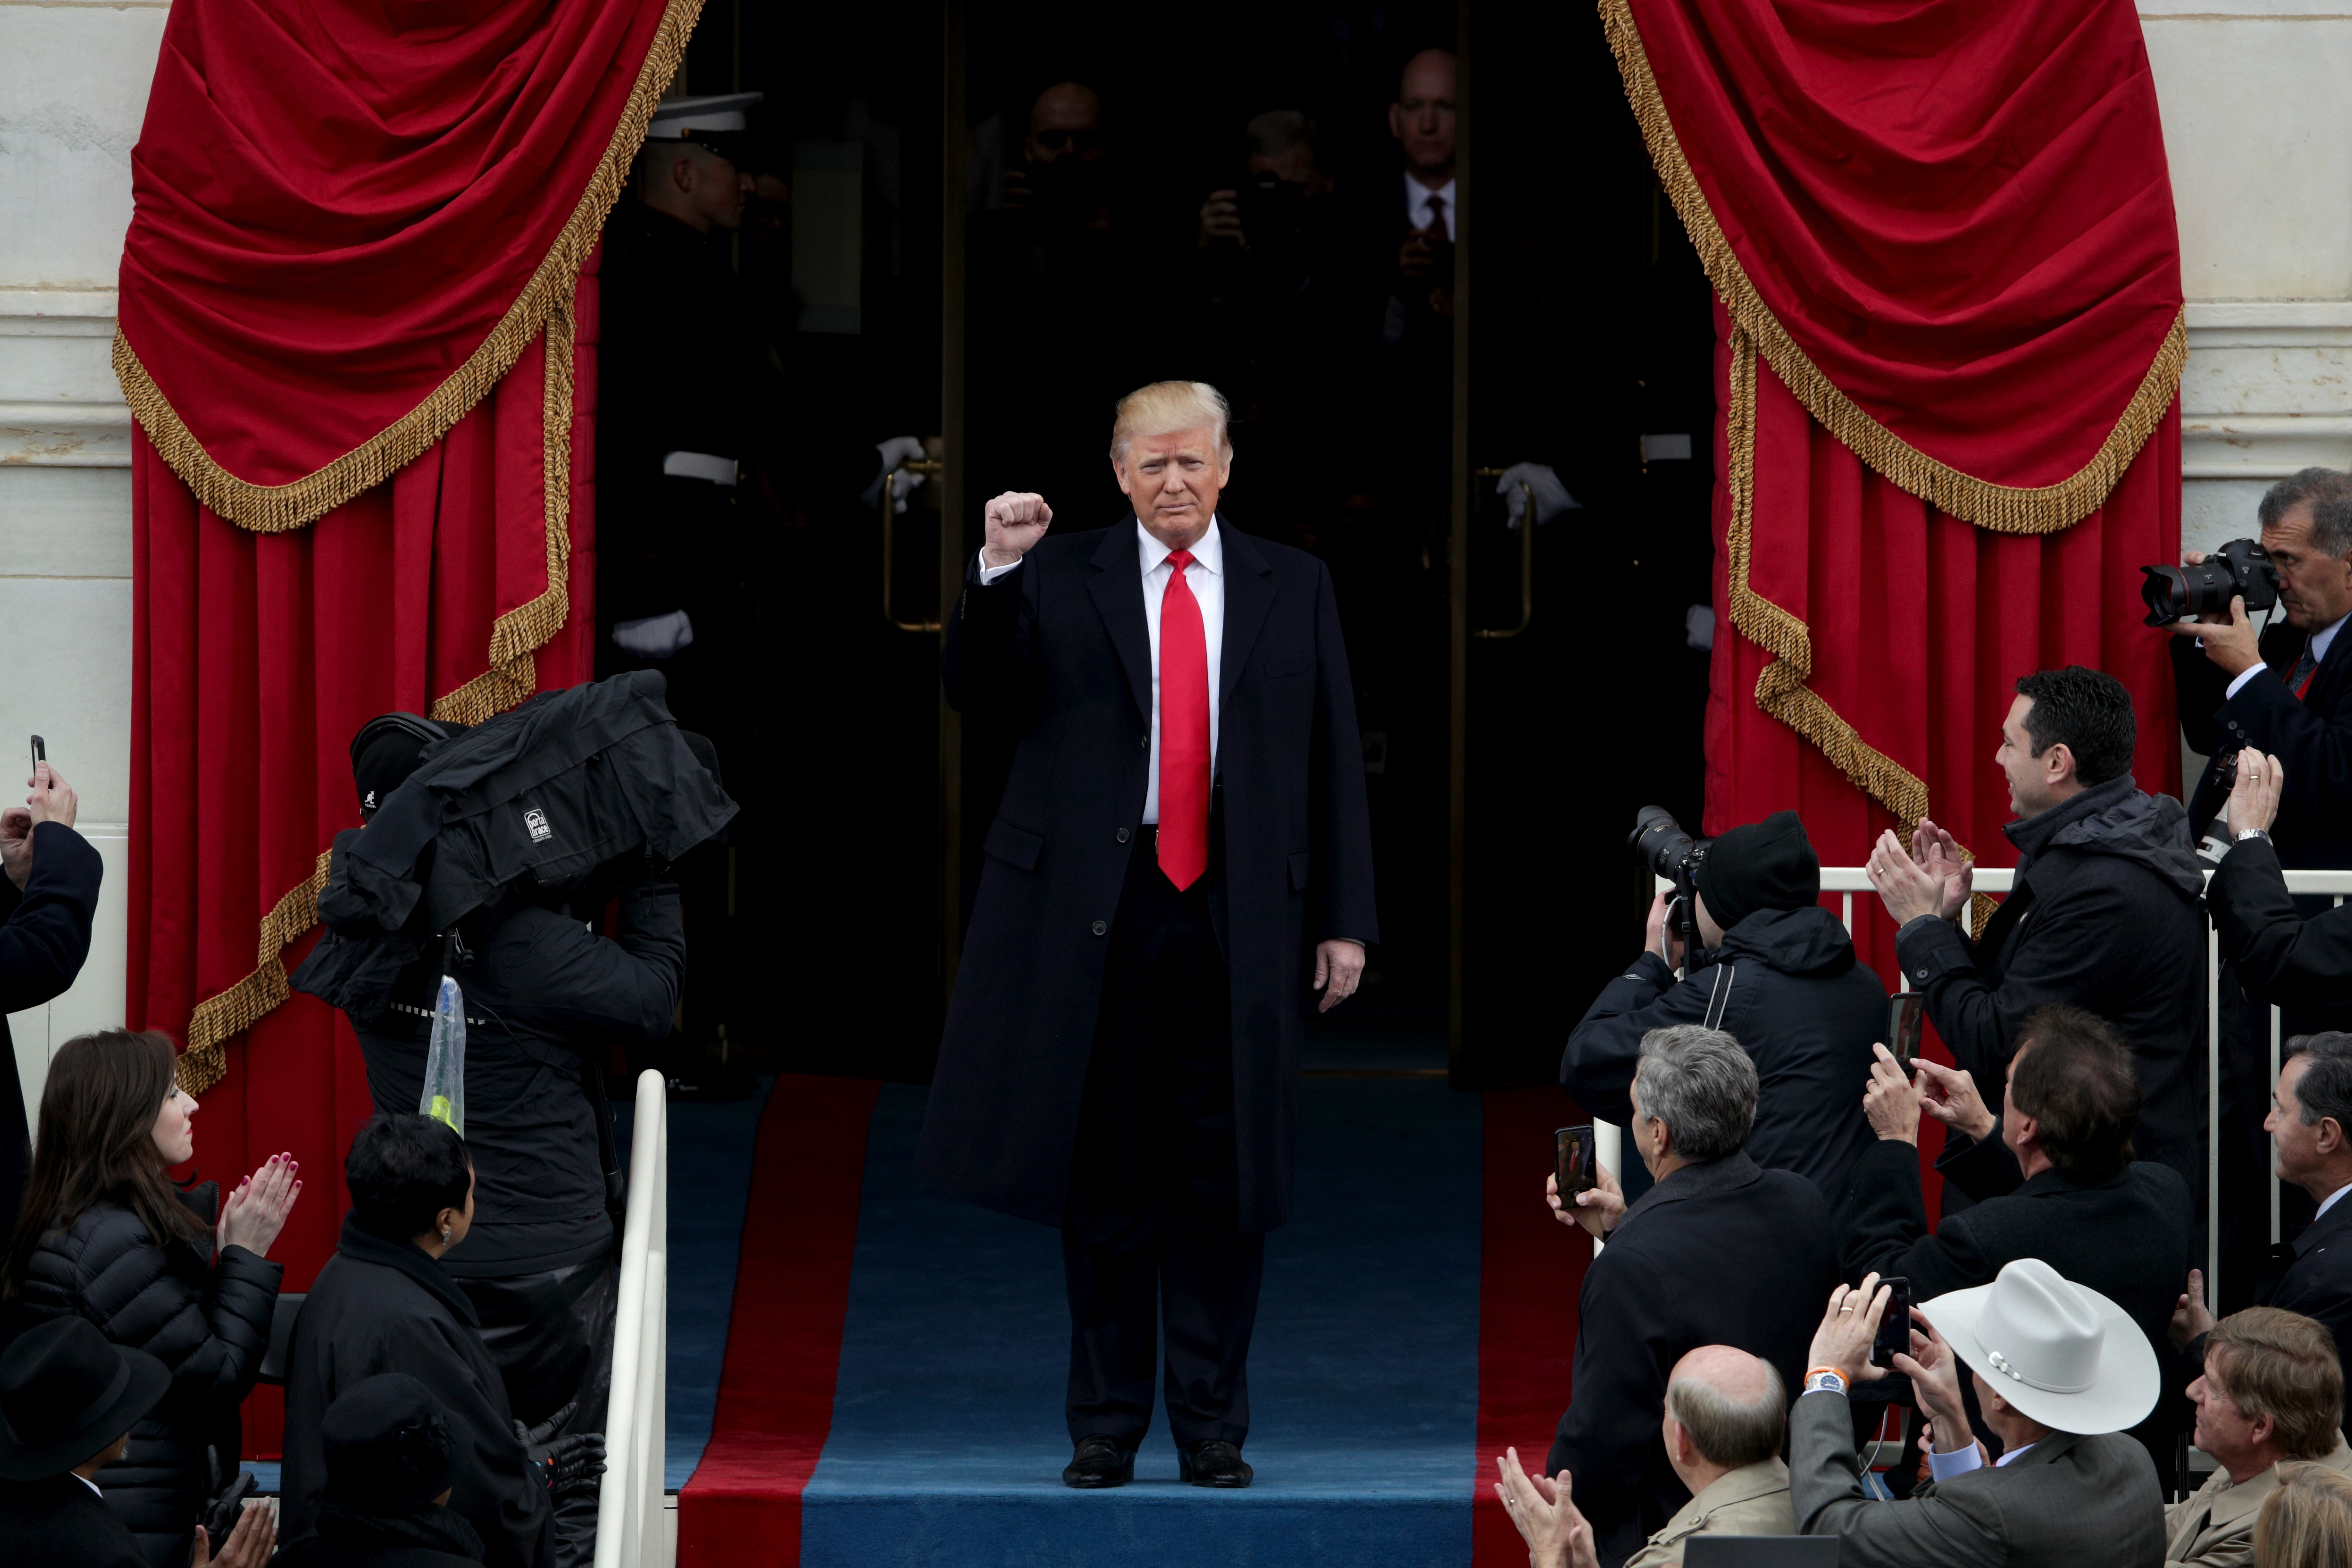 WASHINGTON, DC - JANUARY 20:  President Elect Donald Trump arrives on the West Front of the U.S. Capitol on January 20, 2017 in Washington, DC. In today's inauguration ceremony Donald J. Trump becomes the 45th president of the United States.  (Photo by Alex Wong/Getty Images)